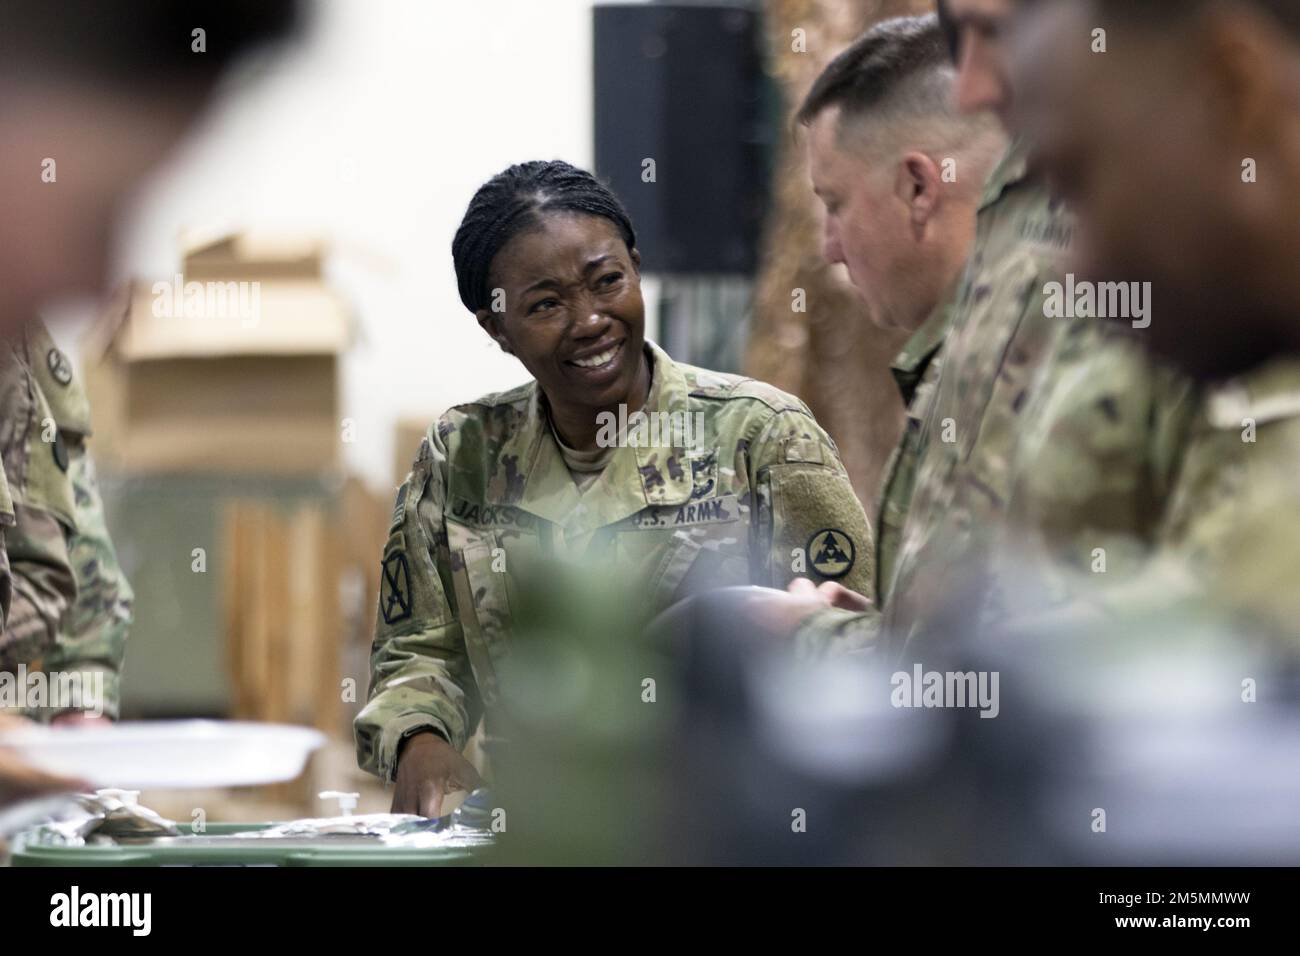 Col. Fenicia L. Jackson, chief of staff, 3rd Expeditionary Sustainment Command, shares a laugh with Col. Sean P. Davis, deputy commanding officer, 1st Theater Sustainment Command, while serving food to Soldiers during a tactical dining-in at Camp Arifjan, Kuwait, Mar. 26, 2022. Brig. Gen. Lance G. Curtis, commanding general, 3rd ESC, hosted the event to uphold U.S. military customs and traditions, foster camaraderie and esprit de corps, and acknowledge the unit’s accomplishments during its deployment in support of 1st TSC. Stock Photo